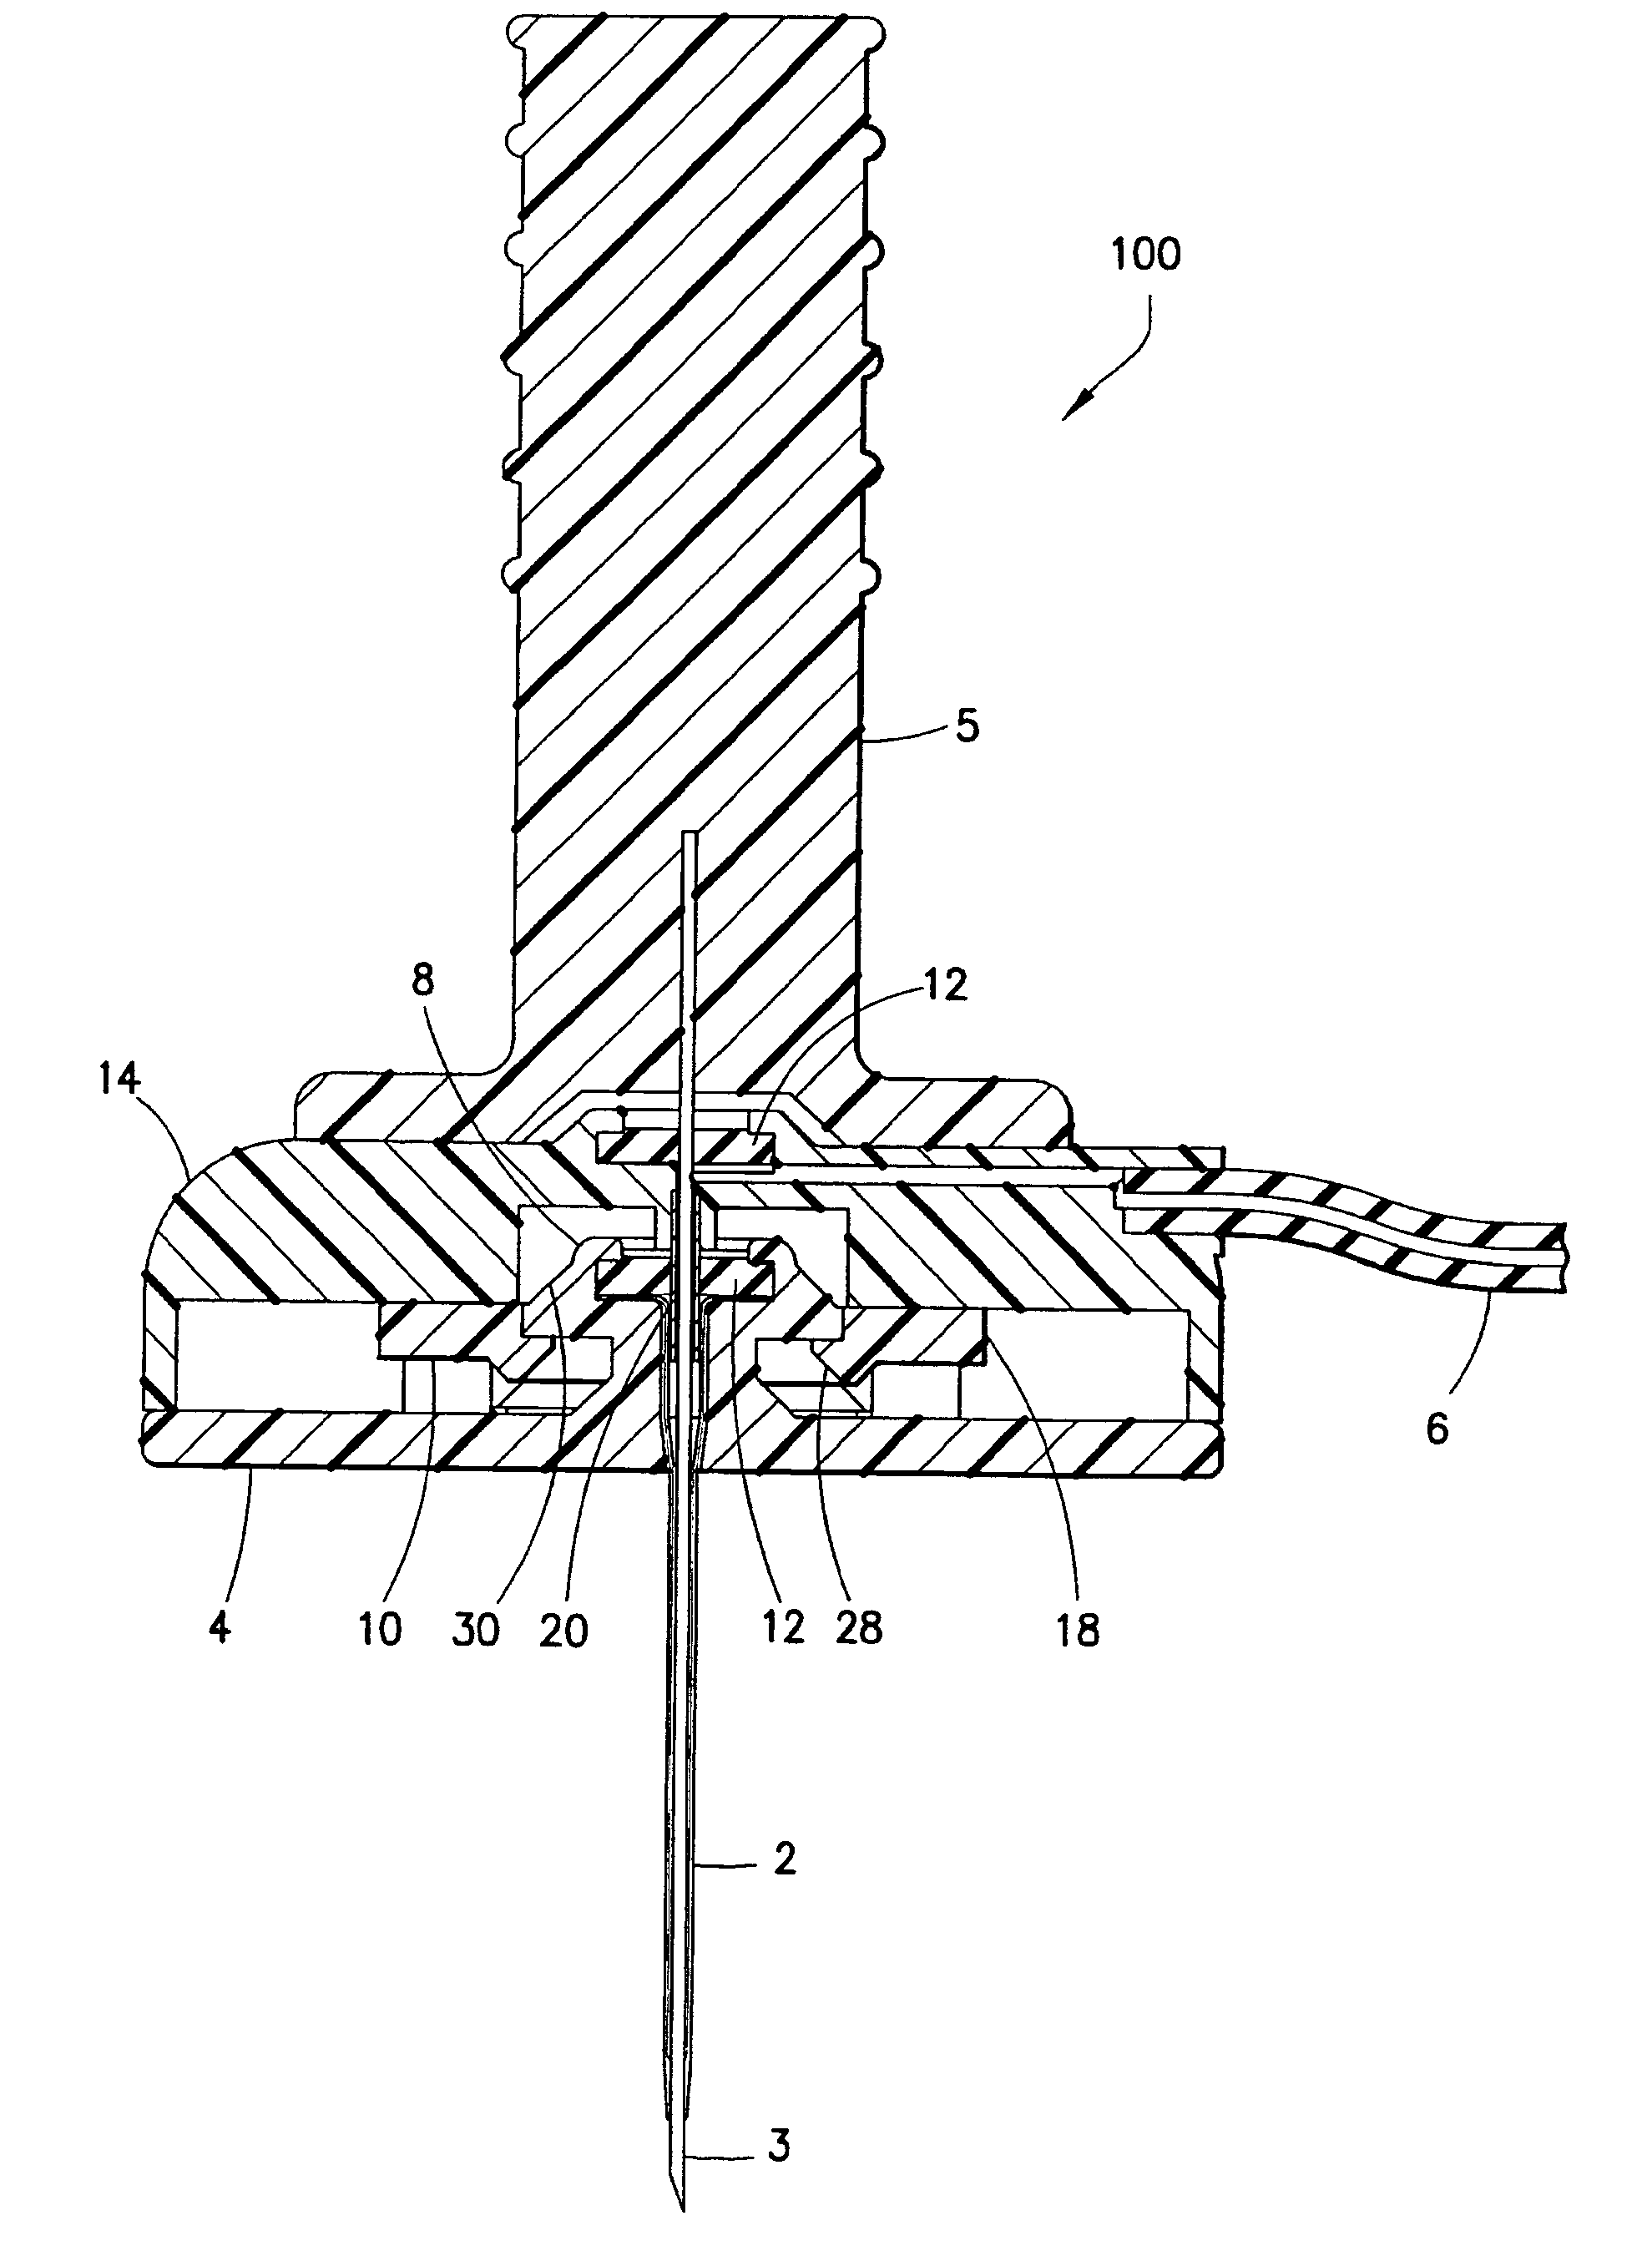 Separatable infusion set with cleanable interface and straight line attachment